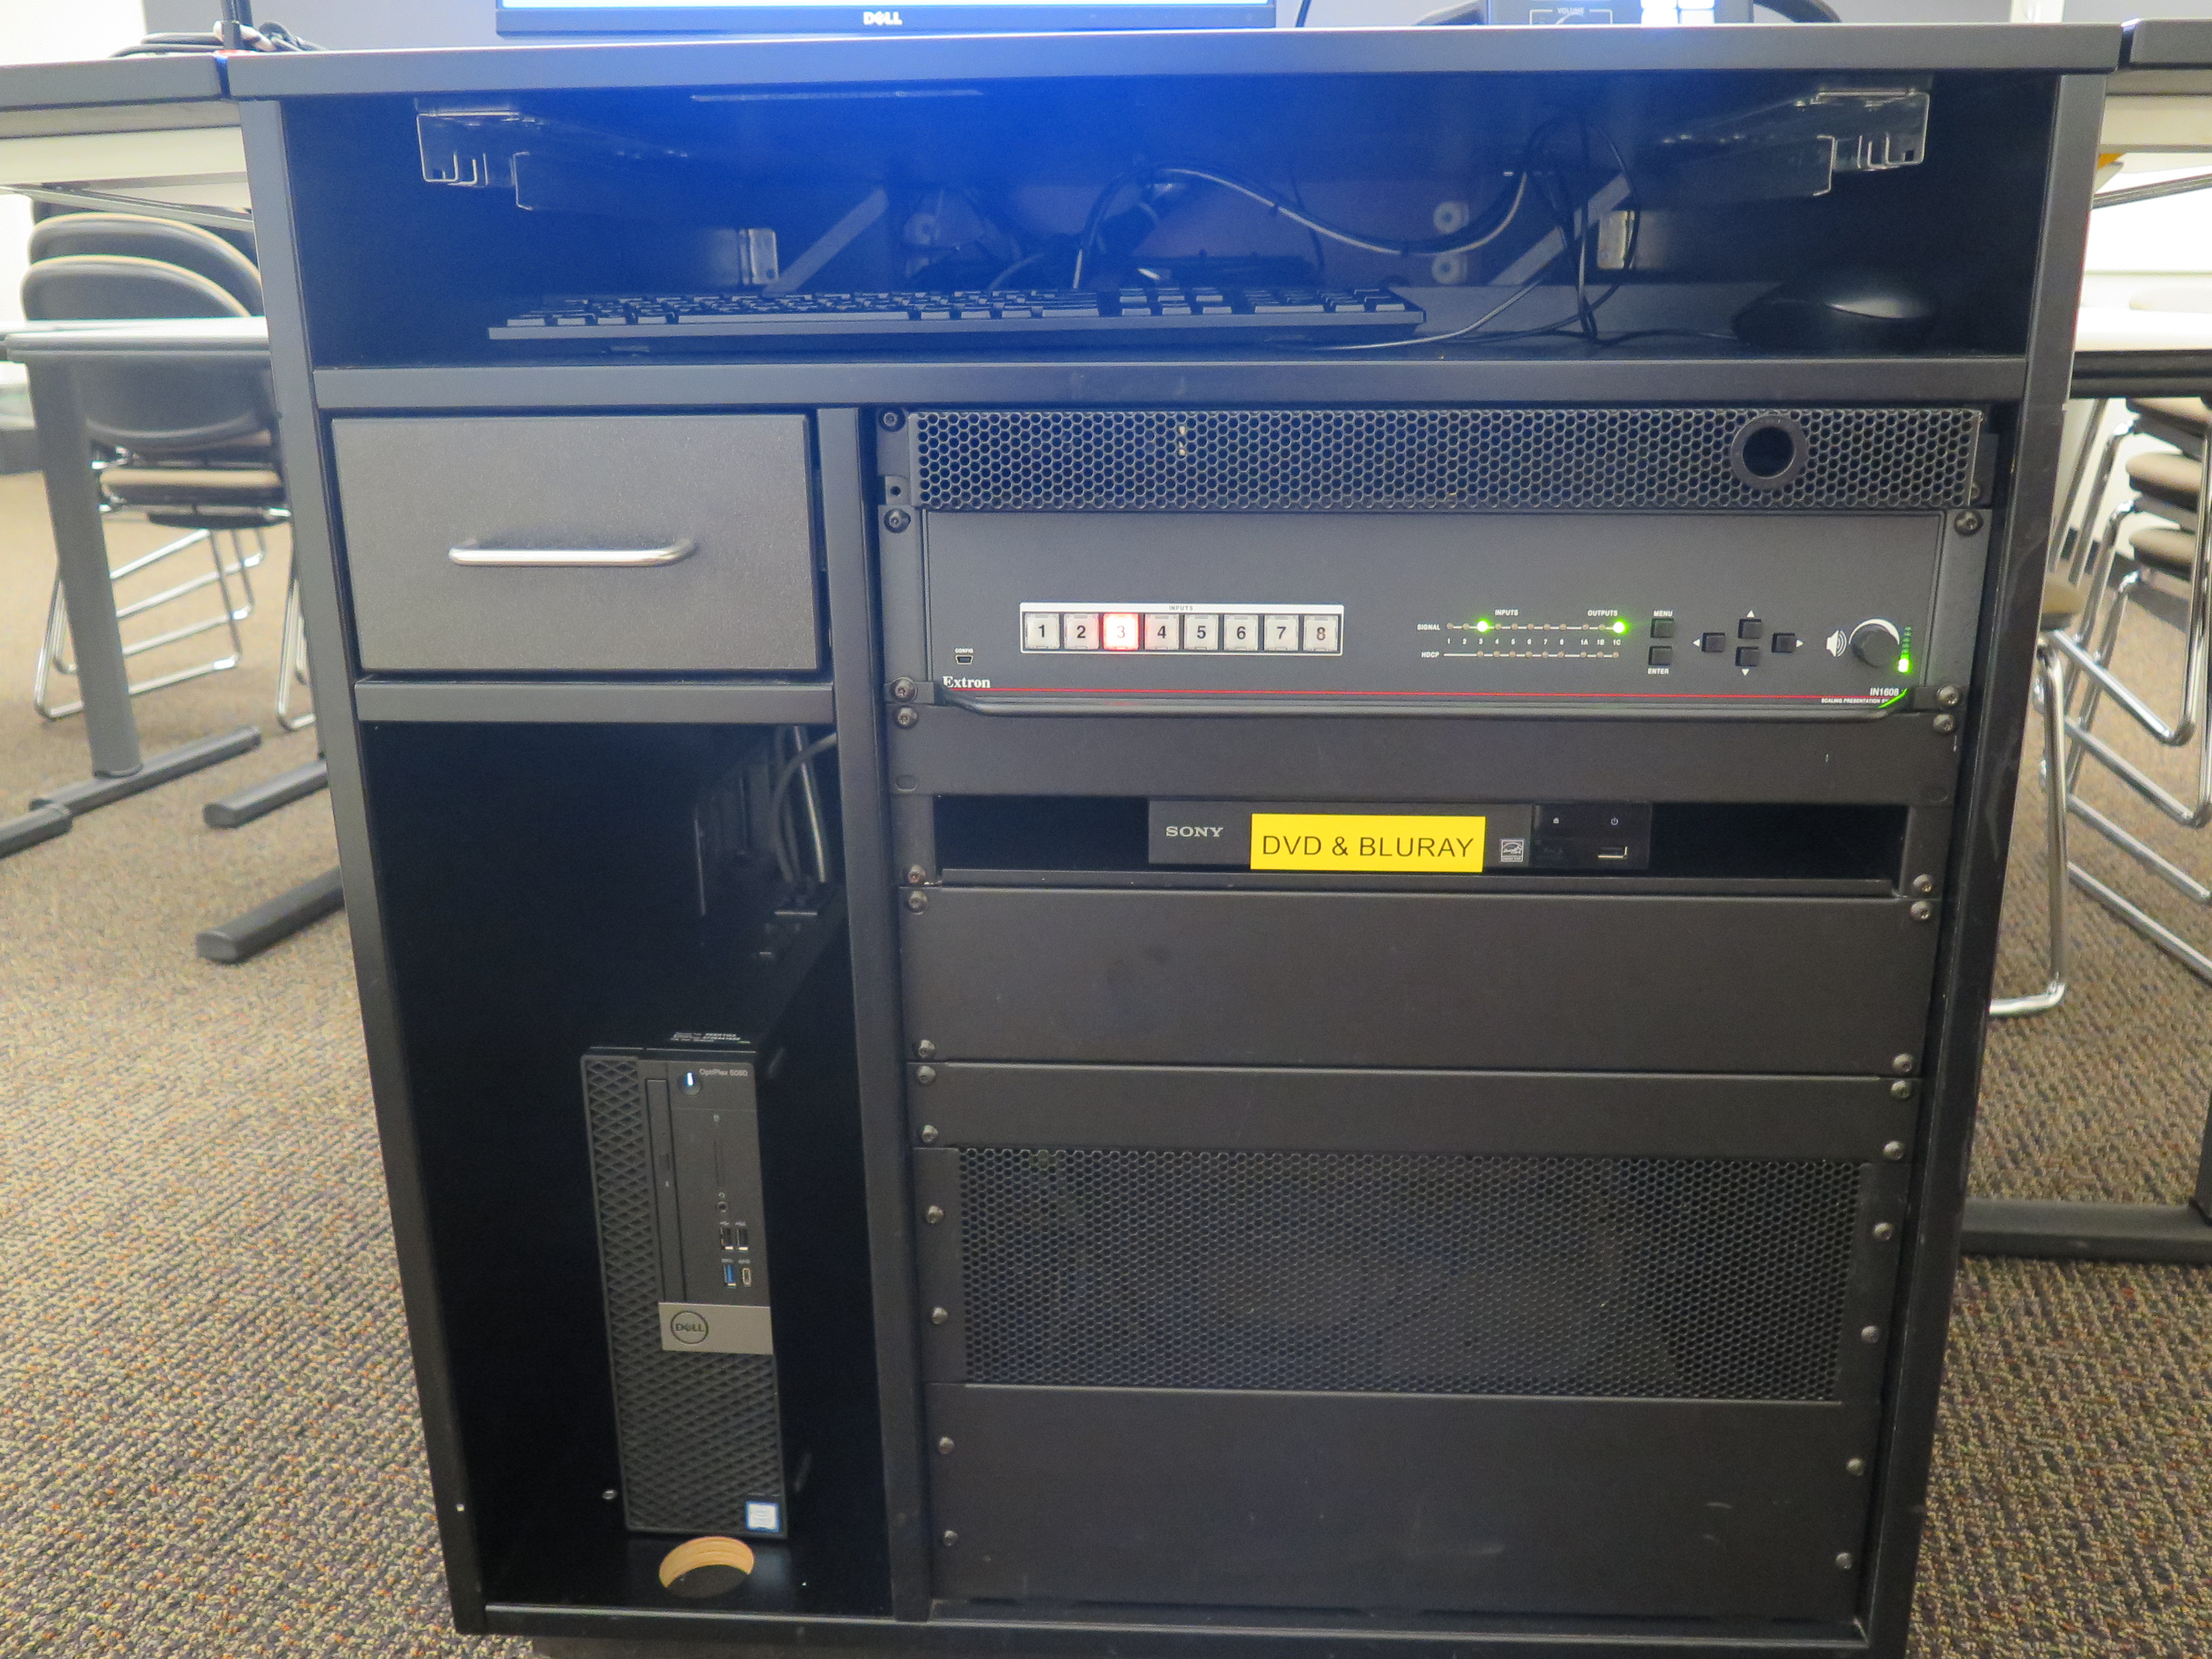 Front of Equipment rack showing AV Switcher. Below that is Blue-Ray/DVD Player. To the left is the the Dell Computer CPU.